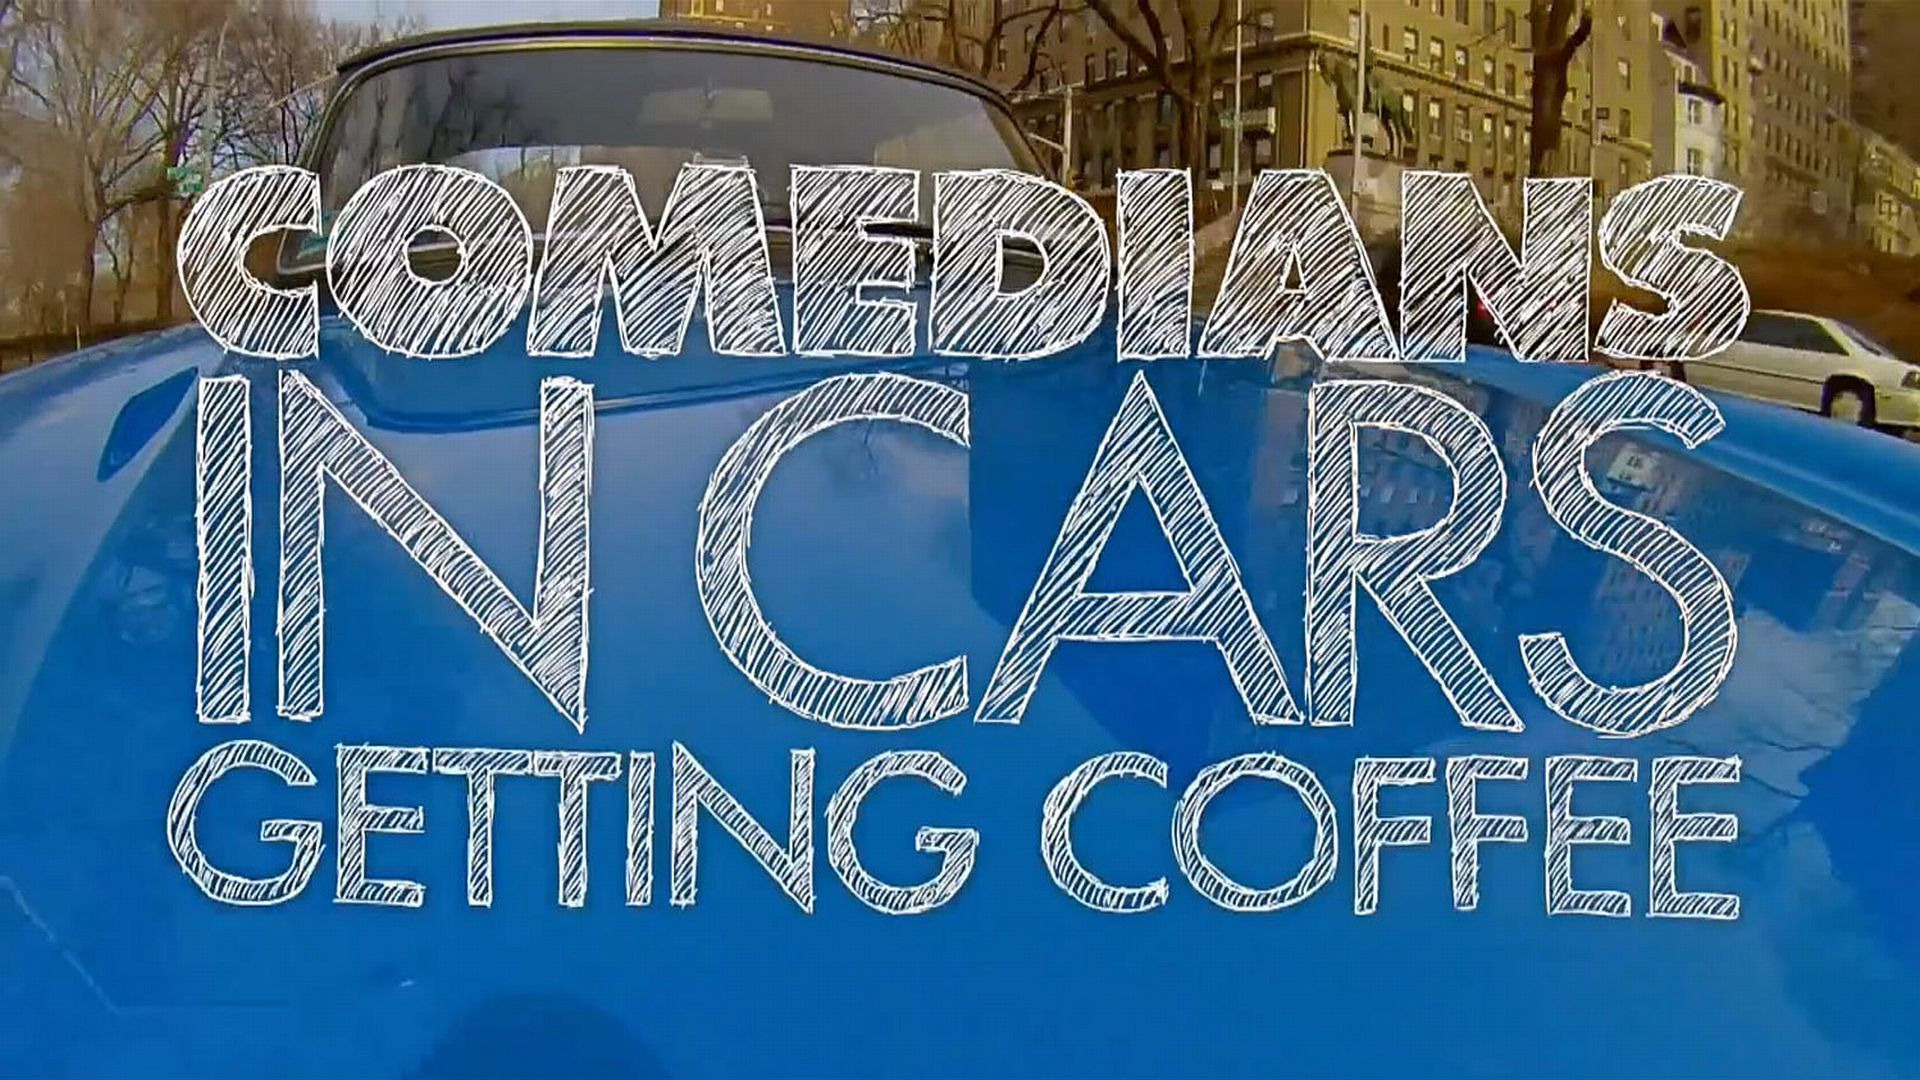 Show Comedians in Cars Getting Coffee